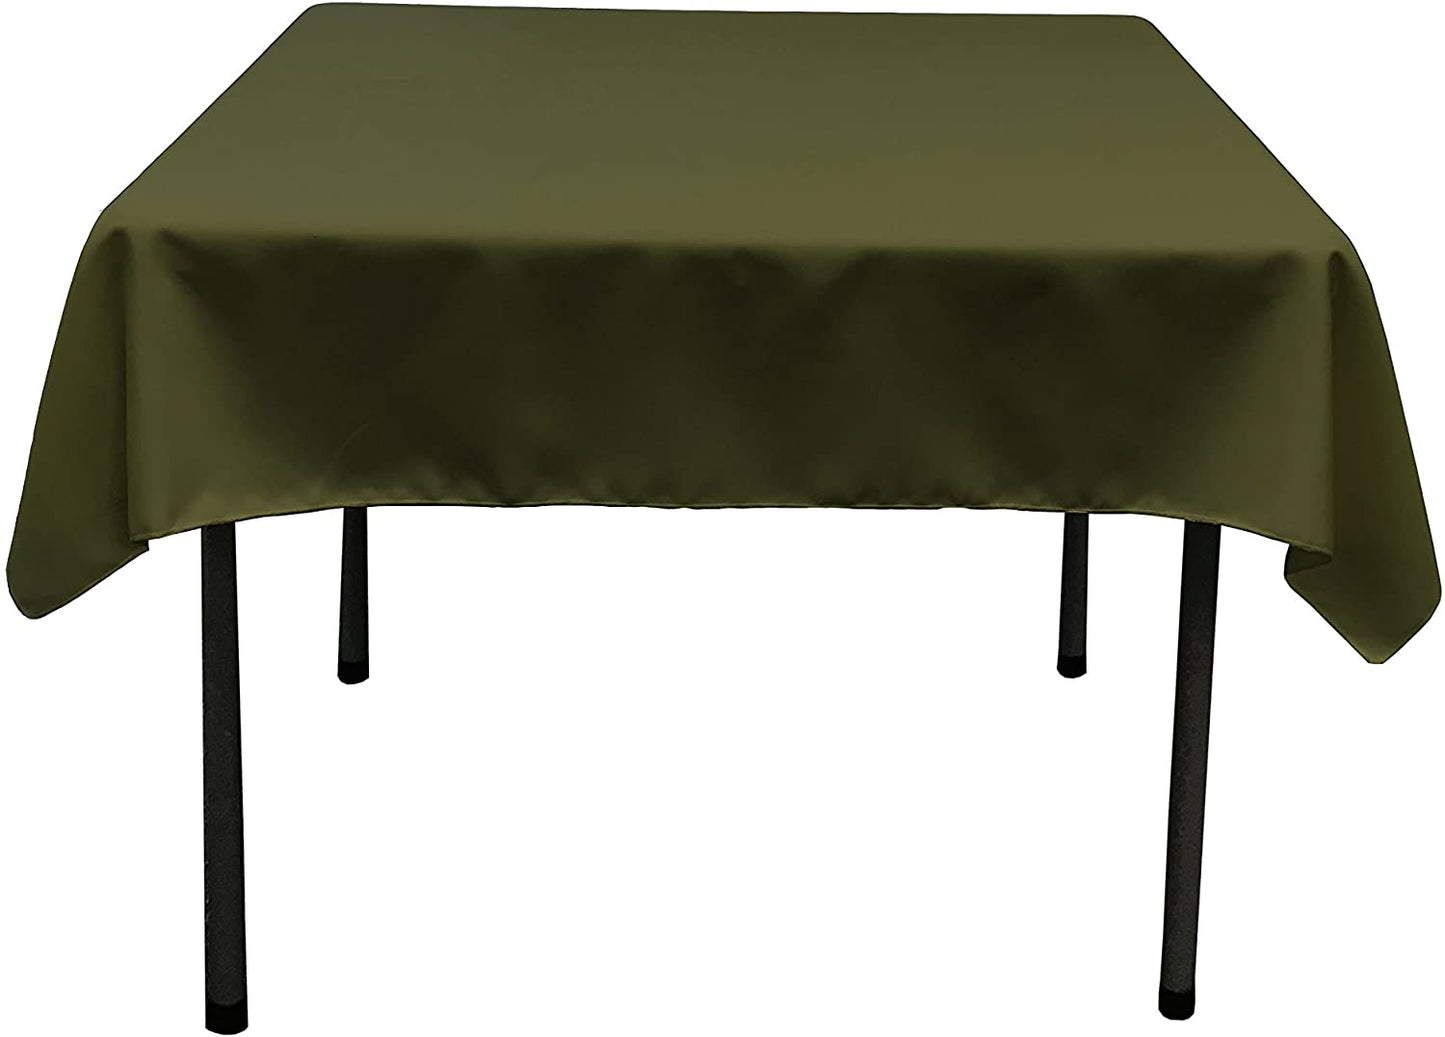 Polyester Poplin Washable Square Tablecloth, Stain and Wrinkle Resistant Table Cover Olive